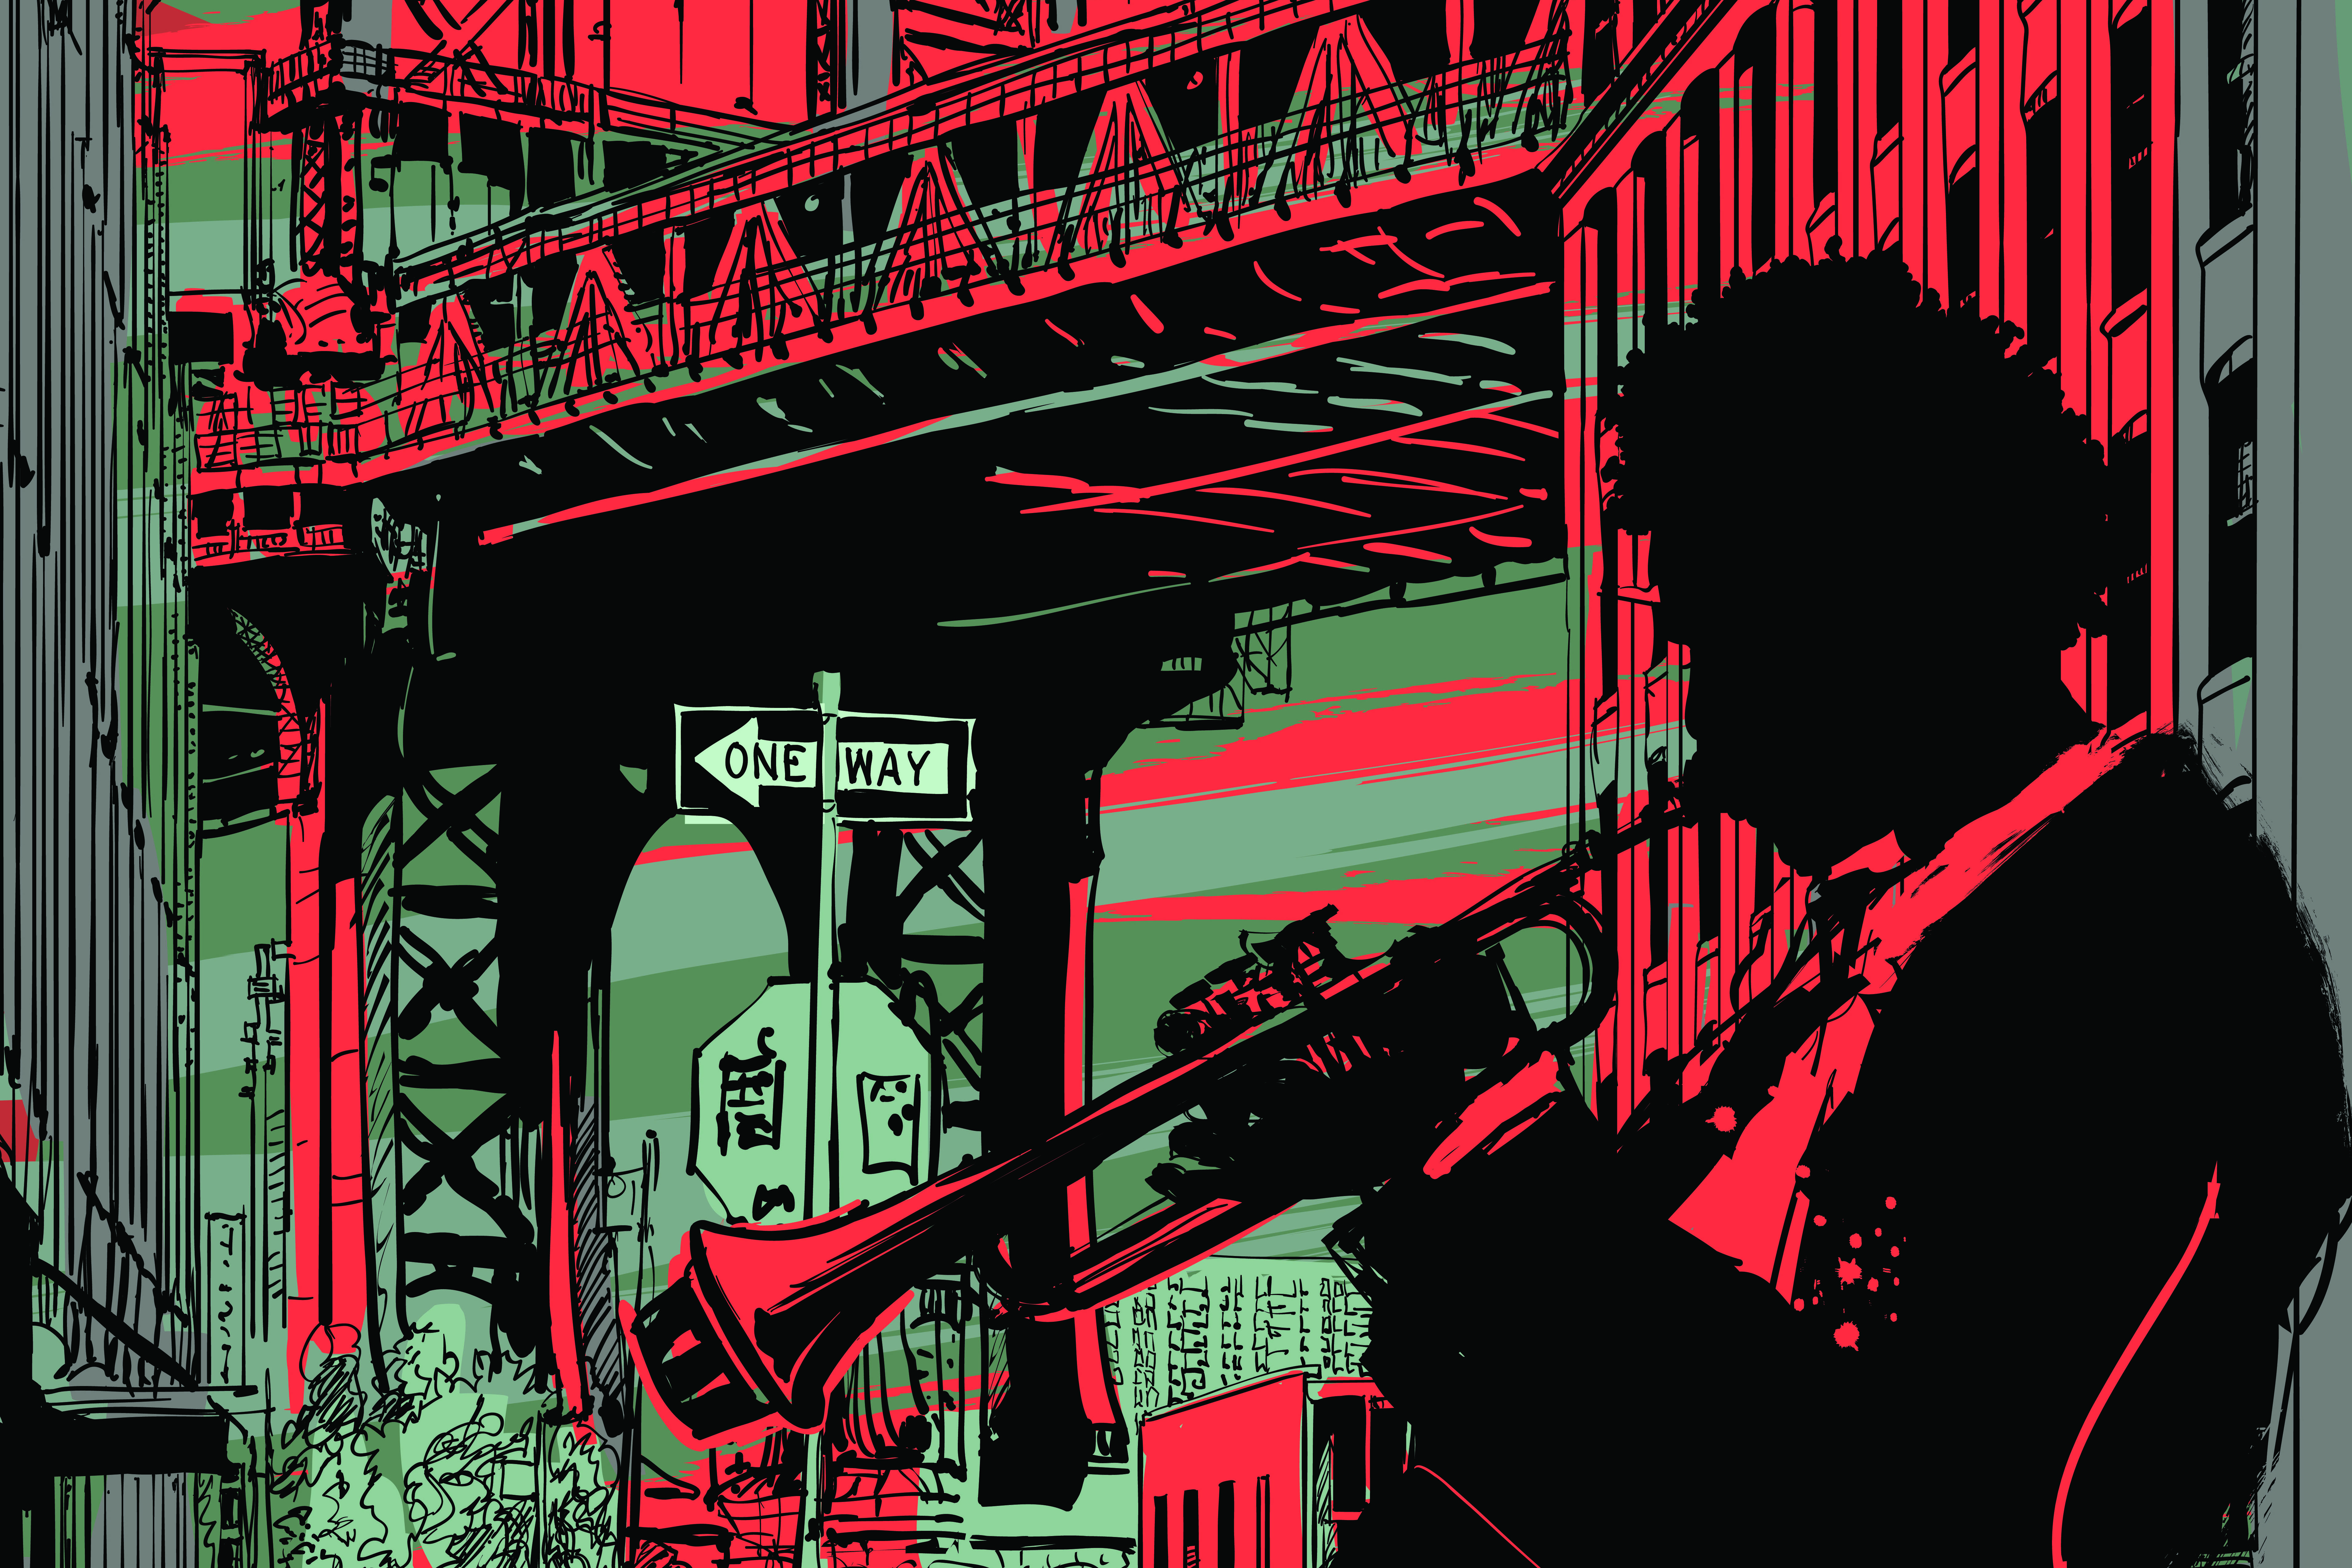 A black, red and grey illustration of a man playing a trumpet next to the Brooklyn Bridge in New York